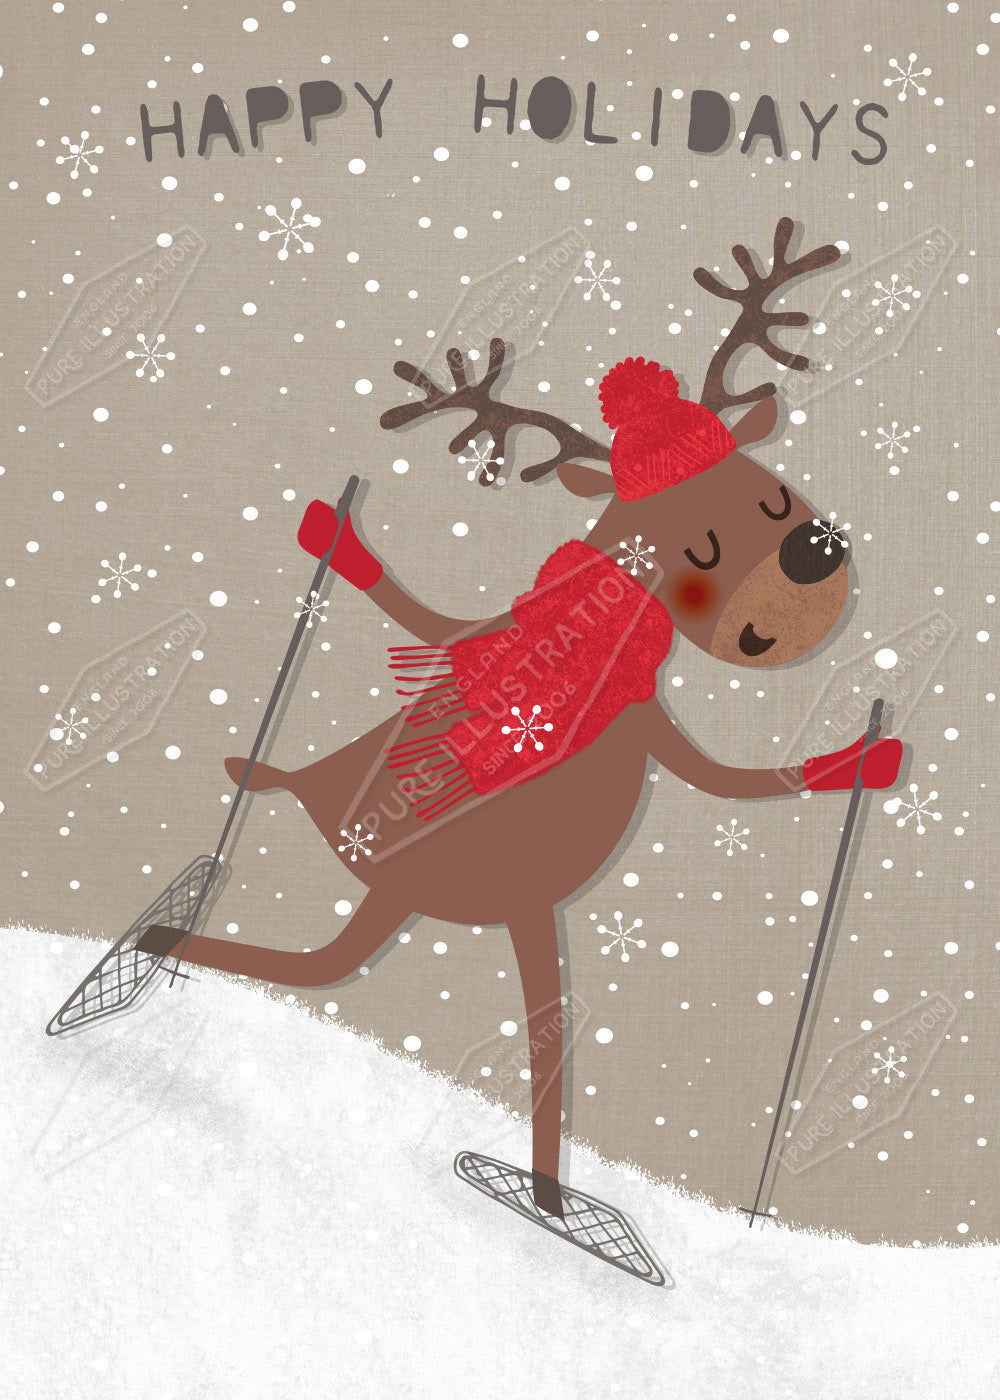 Christmas Skiing Reindeer Design by Gill Eggelston for Pure Art Licensing Agency & Surface Design Studio